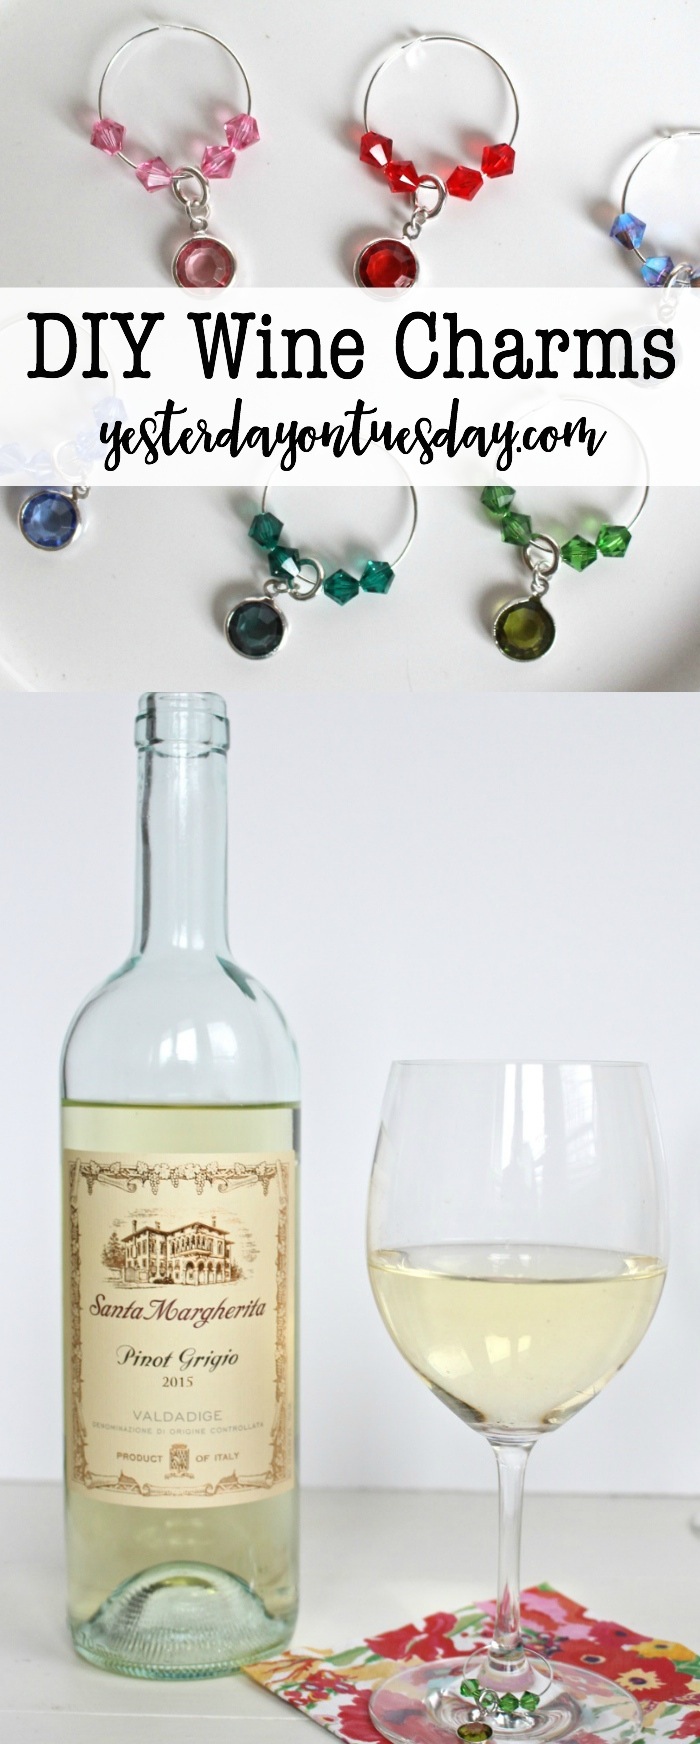 DIY Wine Charms: How to make simple wine charms for a fun girl's night in with wine!